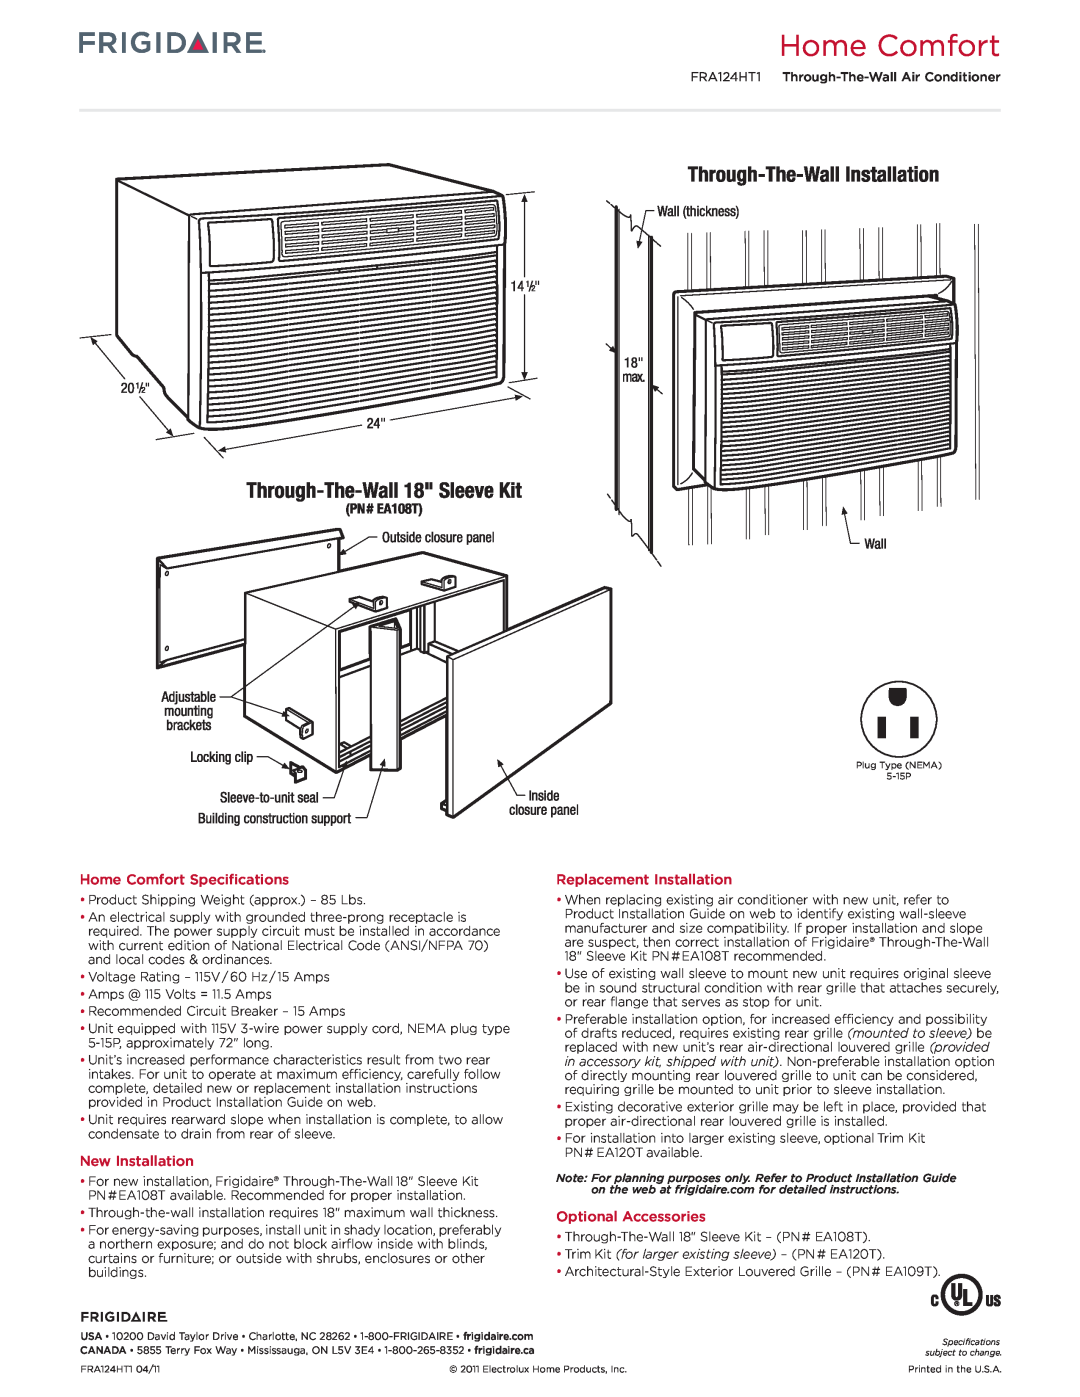 Frigidaire FRA124HT1 Home Comfort Specifications, New Installation, Replacement Installation, Optional Accessories 